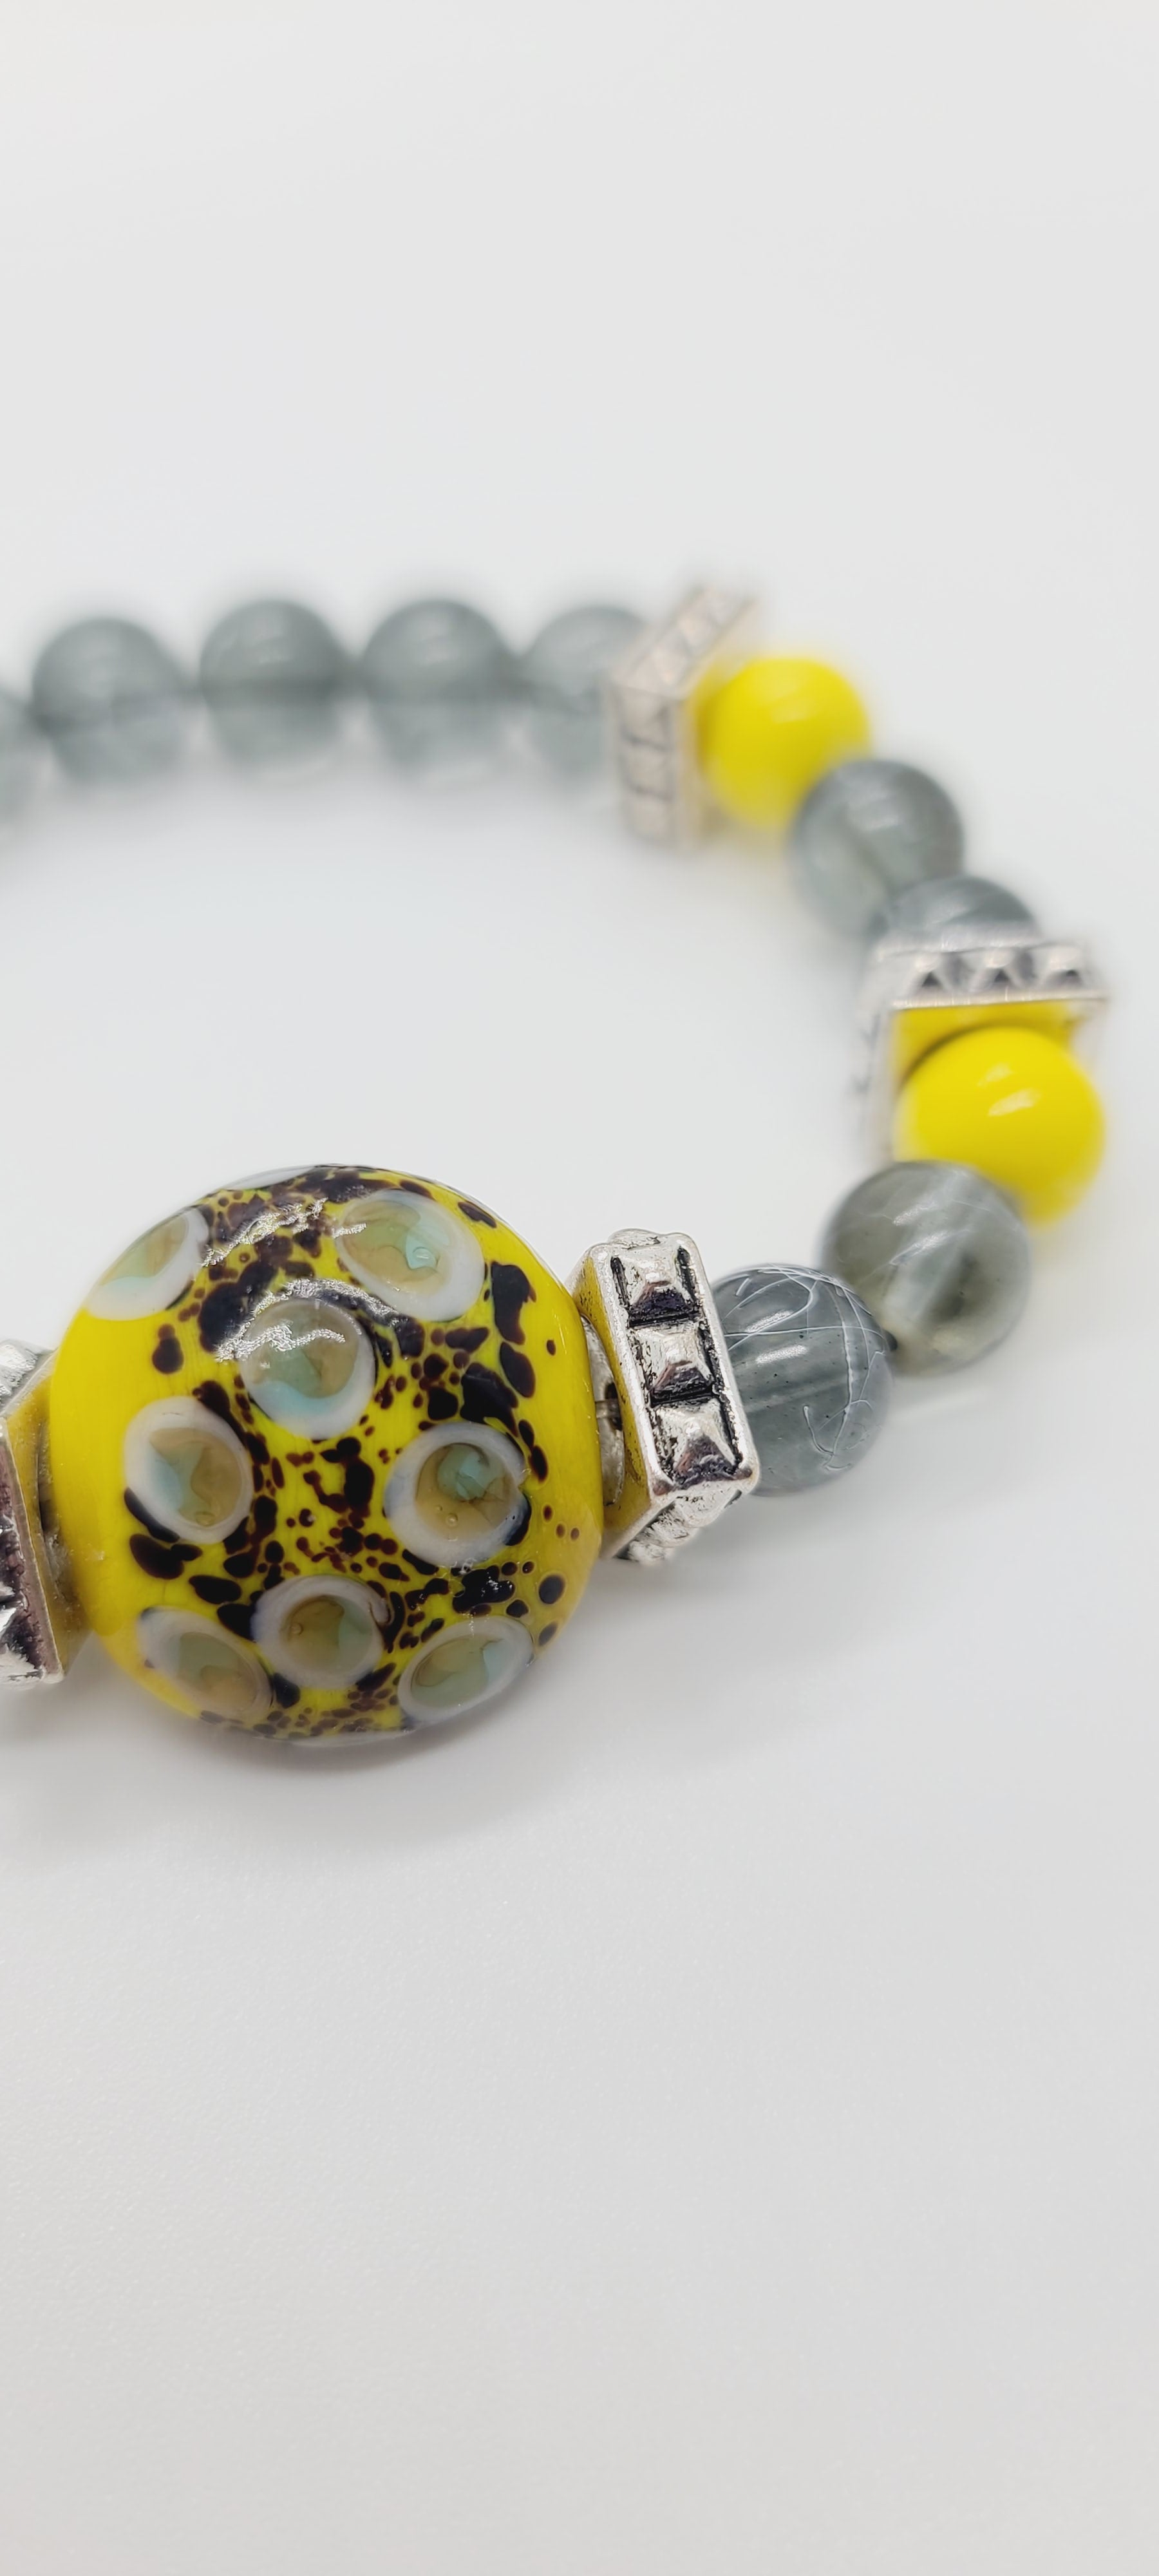 Length: 7.75 inches | Weight: 1.8 ounces  Distinctly You! This bracelet is made with 10mm yellow ceramic and grey white painted glass beads, accented with chrome square spacers, grey and yellow speckle ceramic center charm.